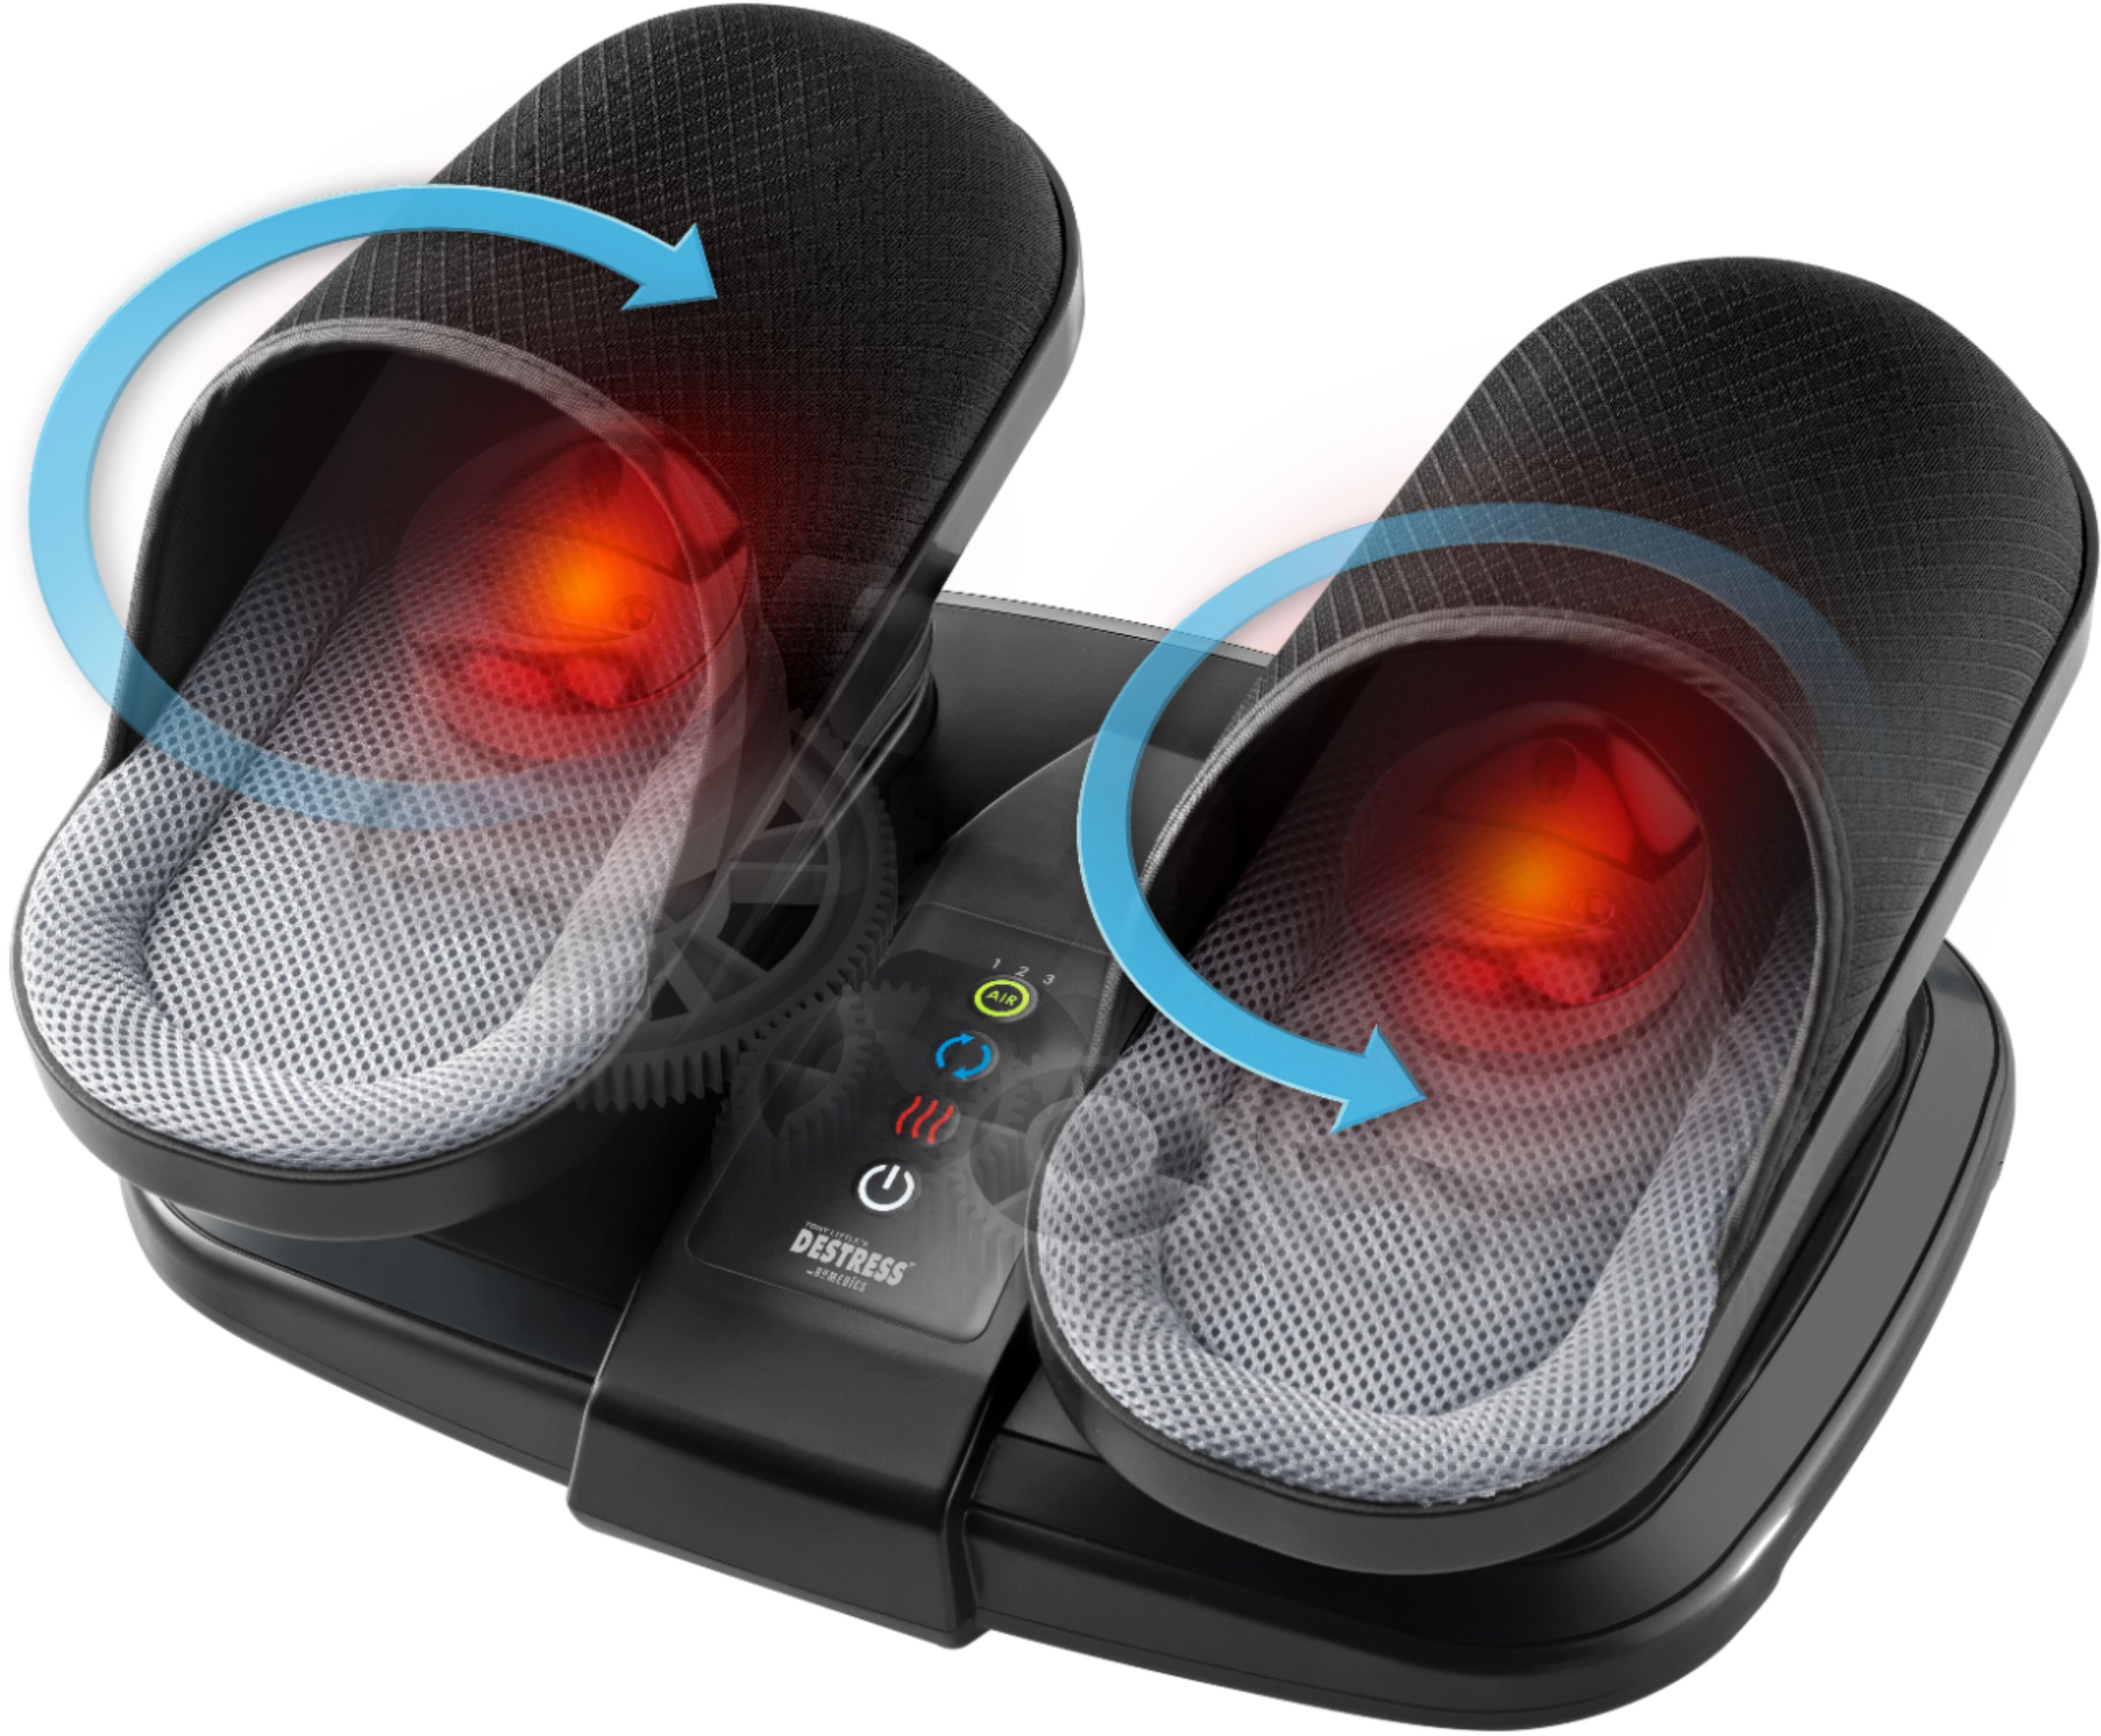 Westinghouse Infrared Foot Massager with Wireless Remote Control Black  WES42-0909-BK - Best Buy